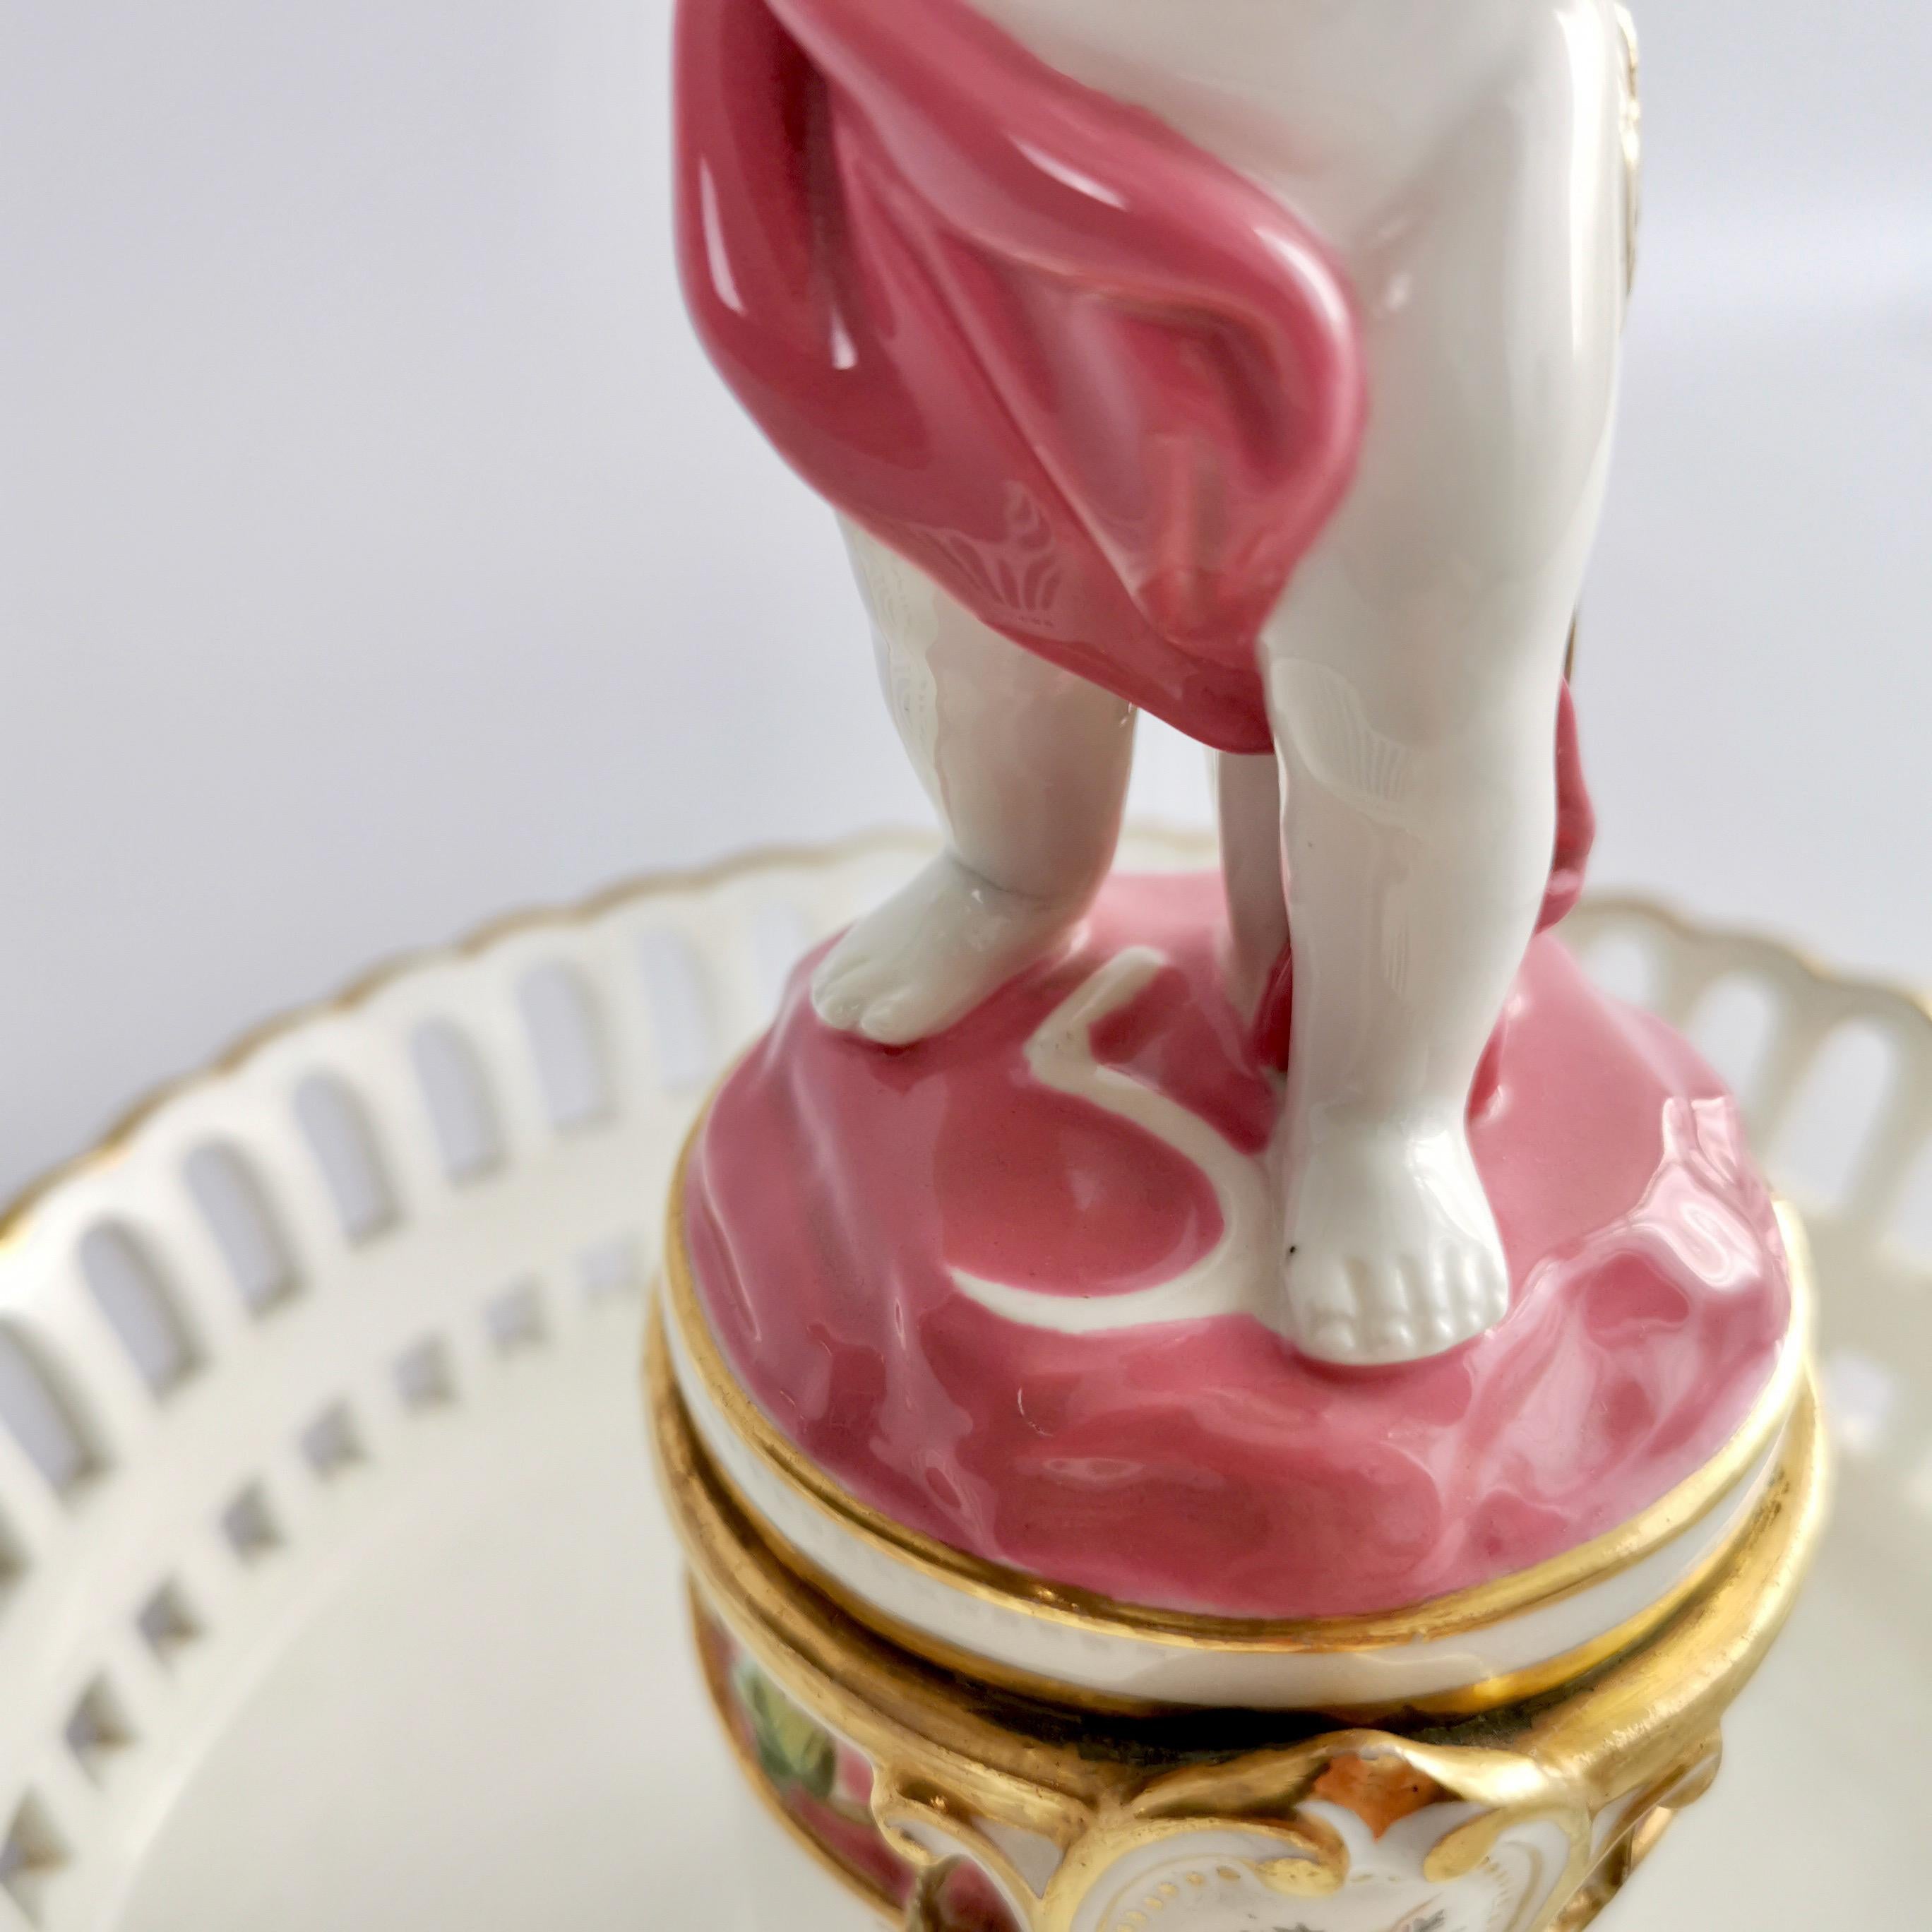 Minton Porcelain Tazza Dish, White and Pink with Cherub, 1891 1